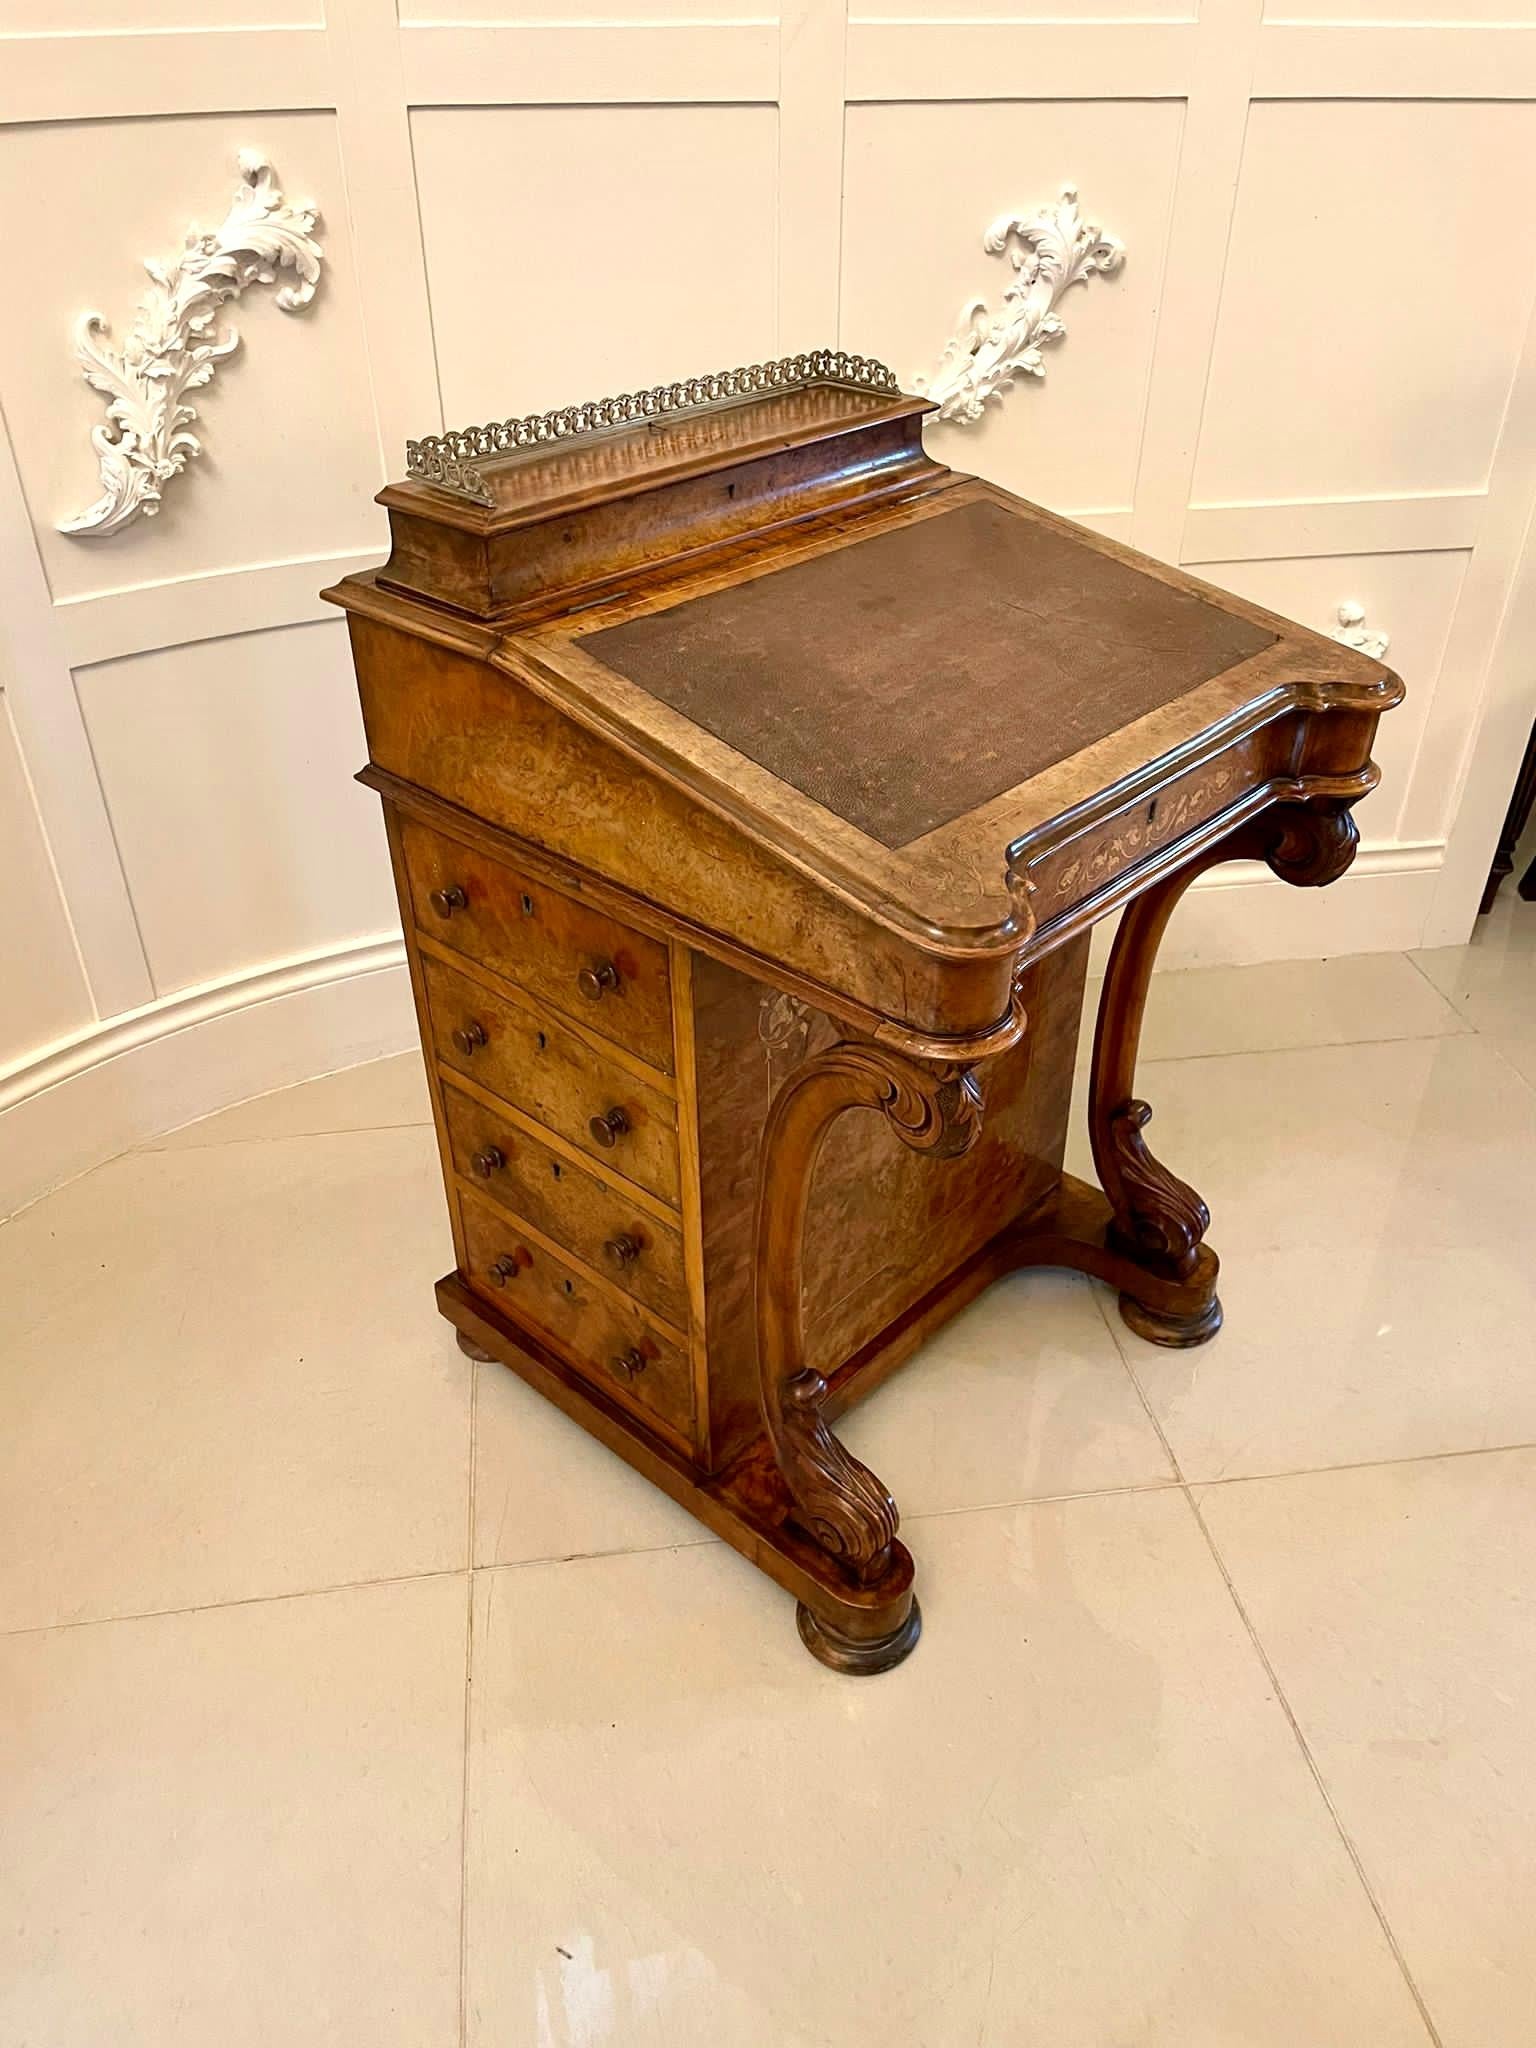 Antique Victorian quality burr walnut inlaid freestanding davenport having the original brass gallery over lift up lid opening to reveal a storage compartment, sloped writing surface with a leather inset crossbanded in burr walnut, four working